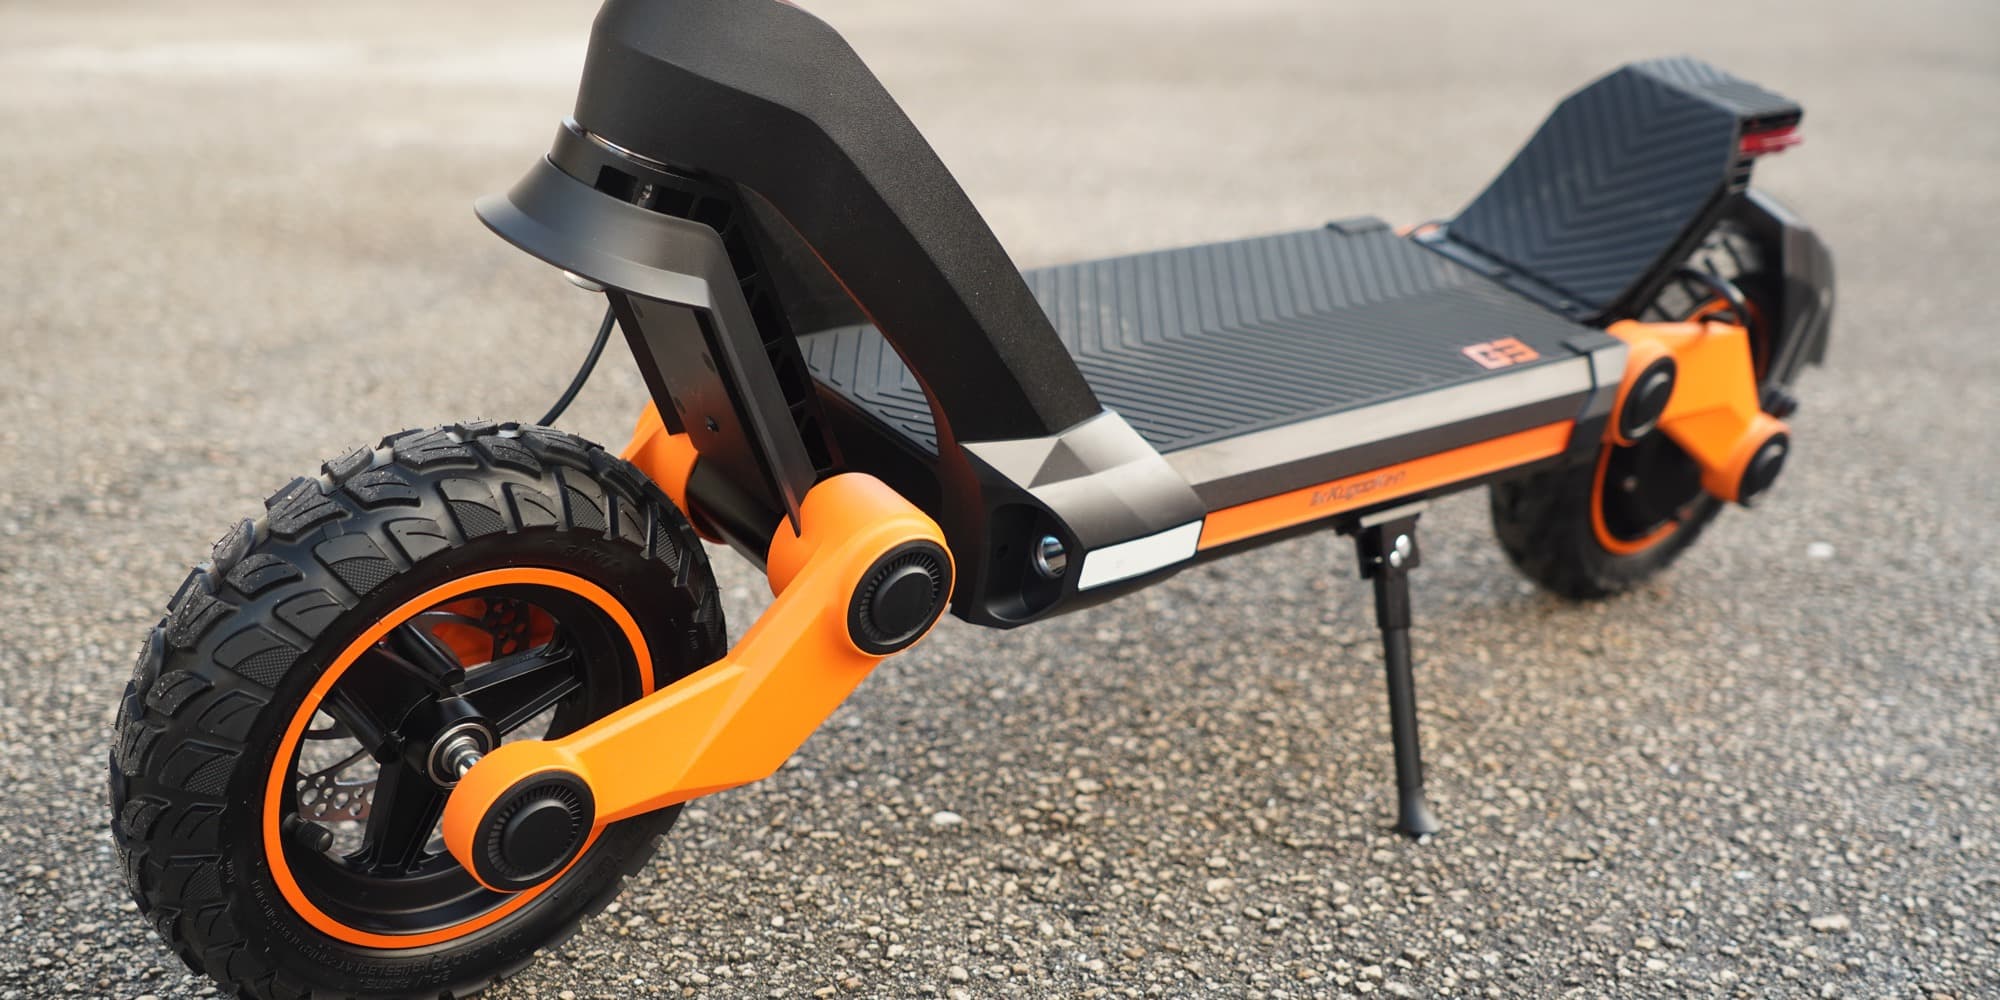 KUGOO Electric Scooter-Top Ranked Distributor